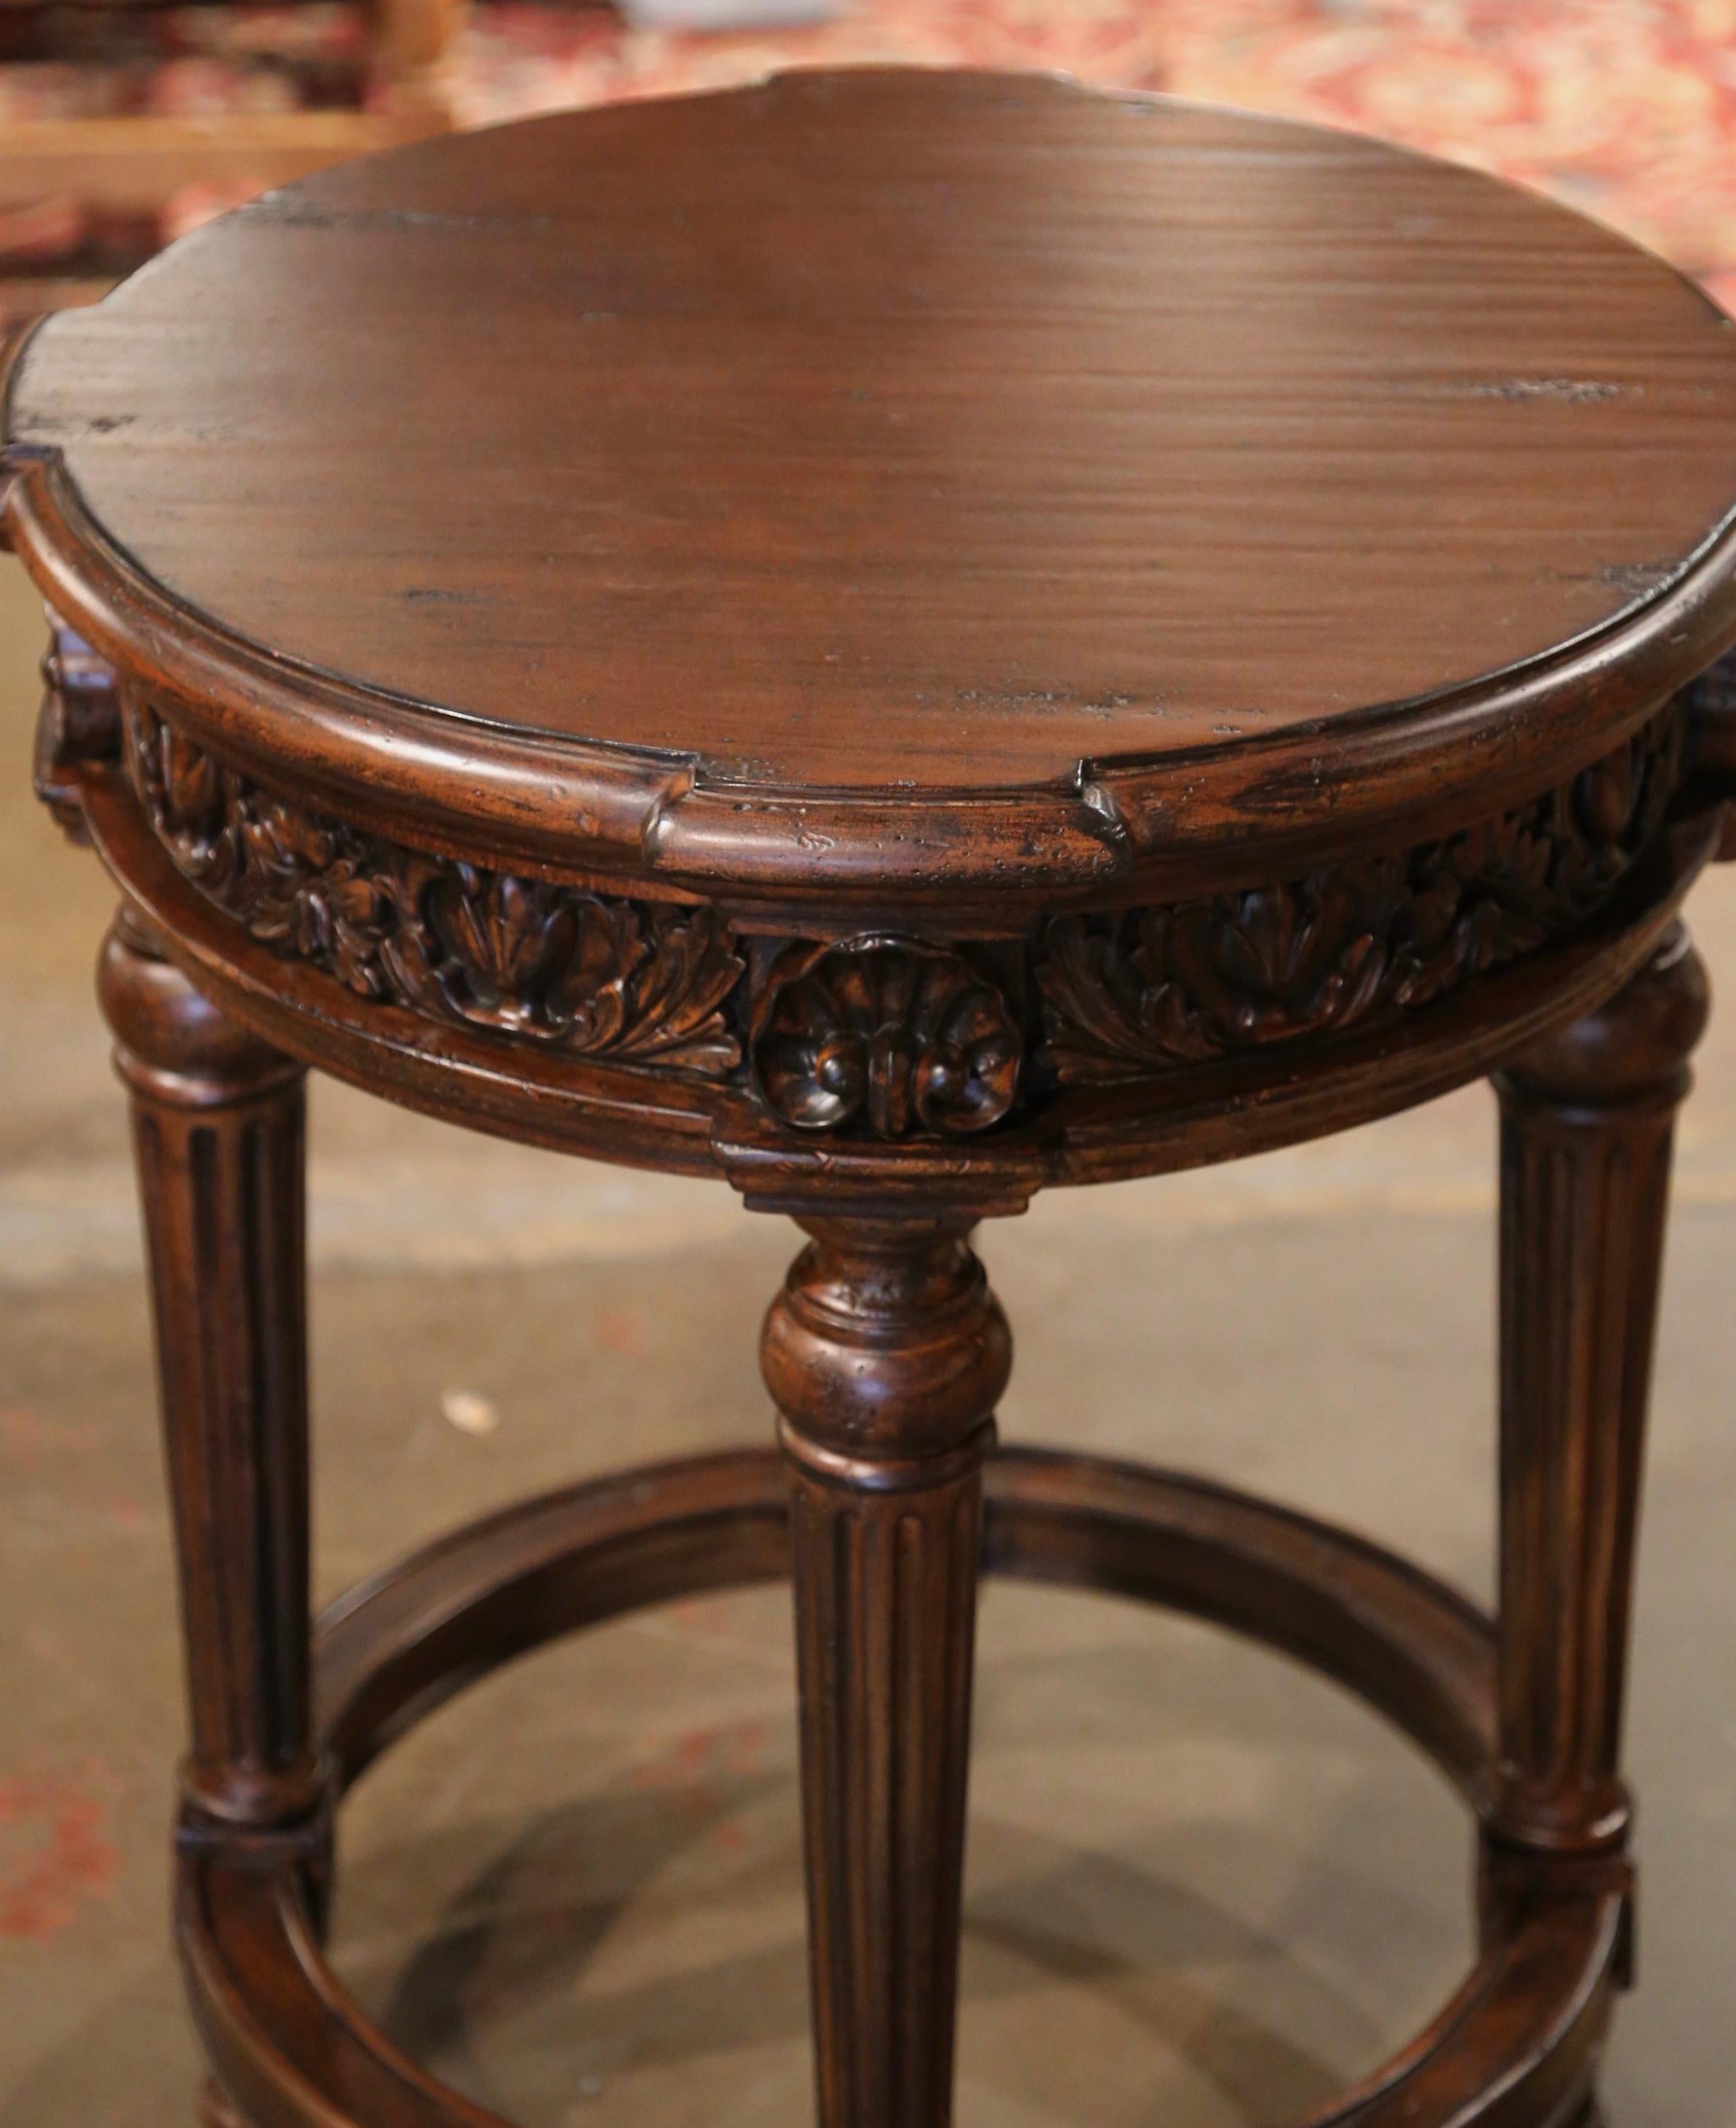 Vintage Louis XVI Style Carved Walnut Gueridon Side Table from Habersham For Sale 1